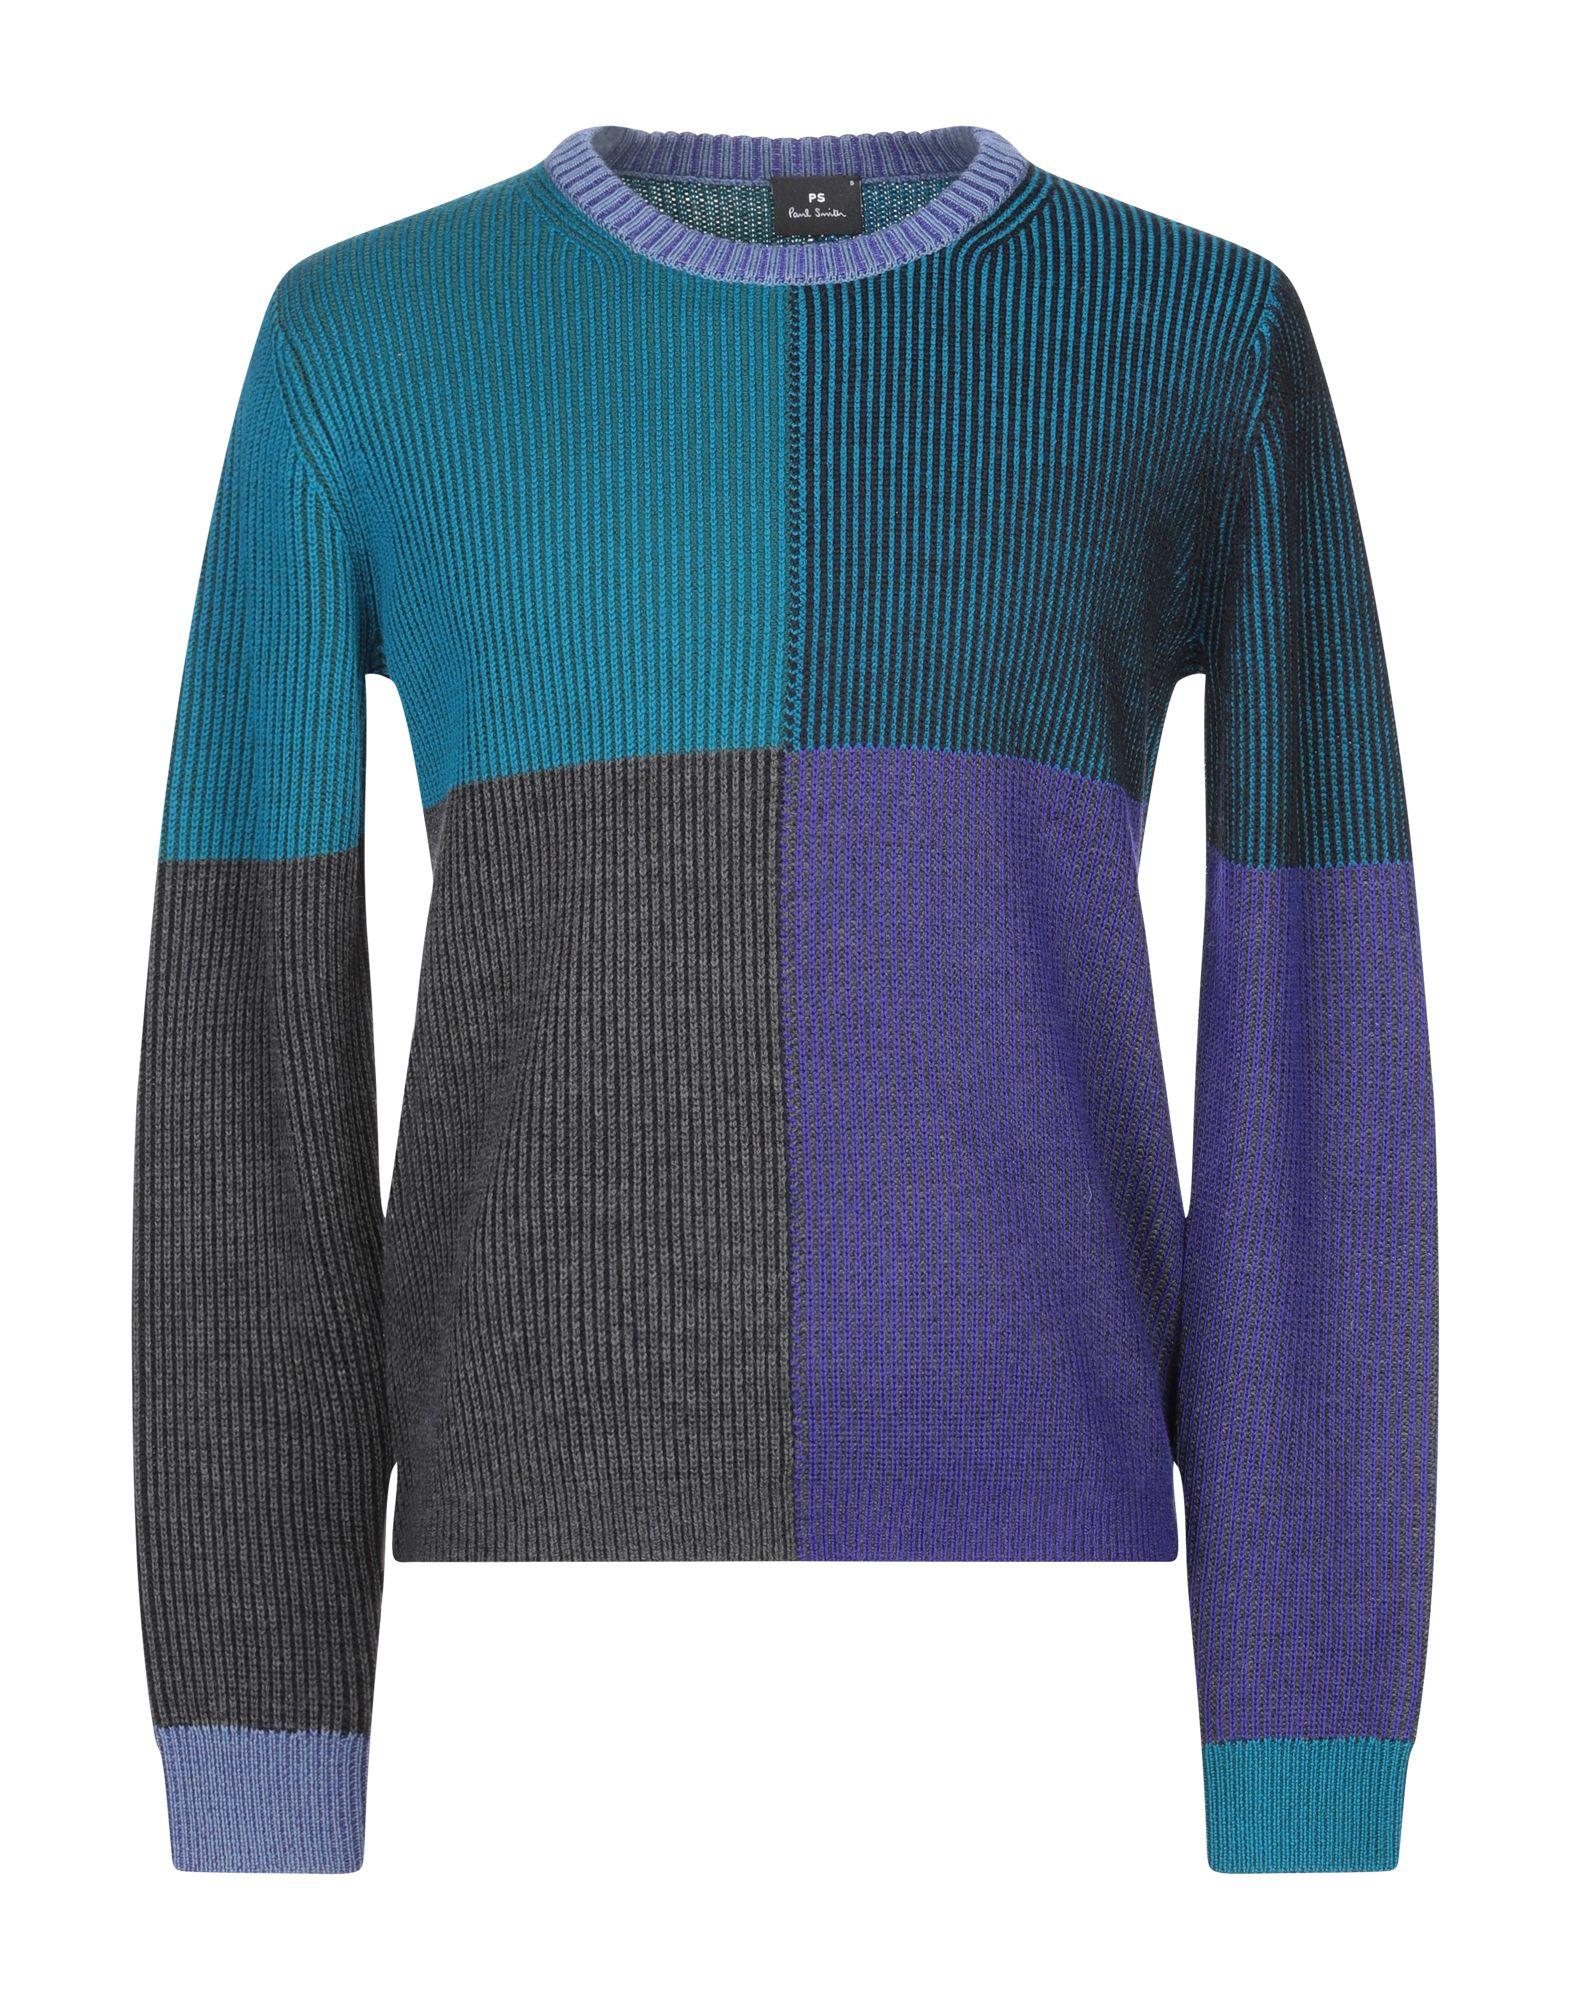 PS by Paul Smith Sweater in Black for Men - Lyst